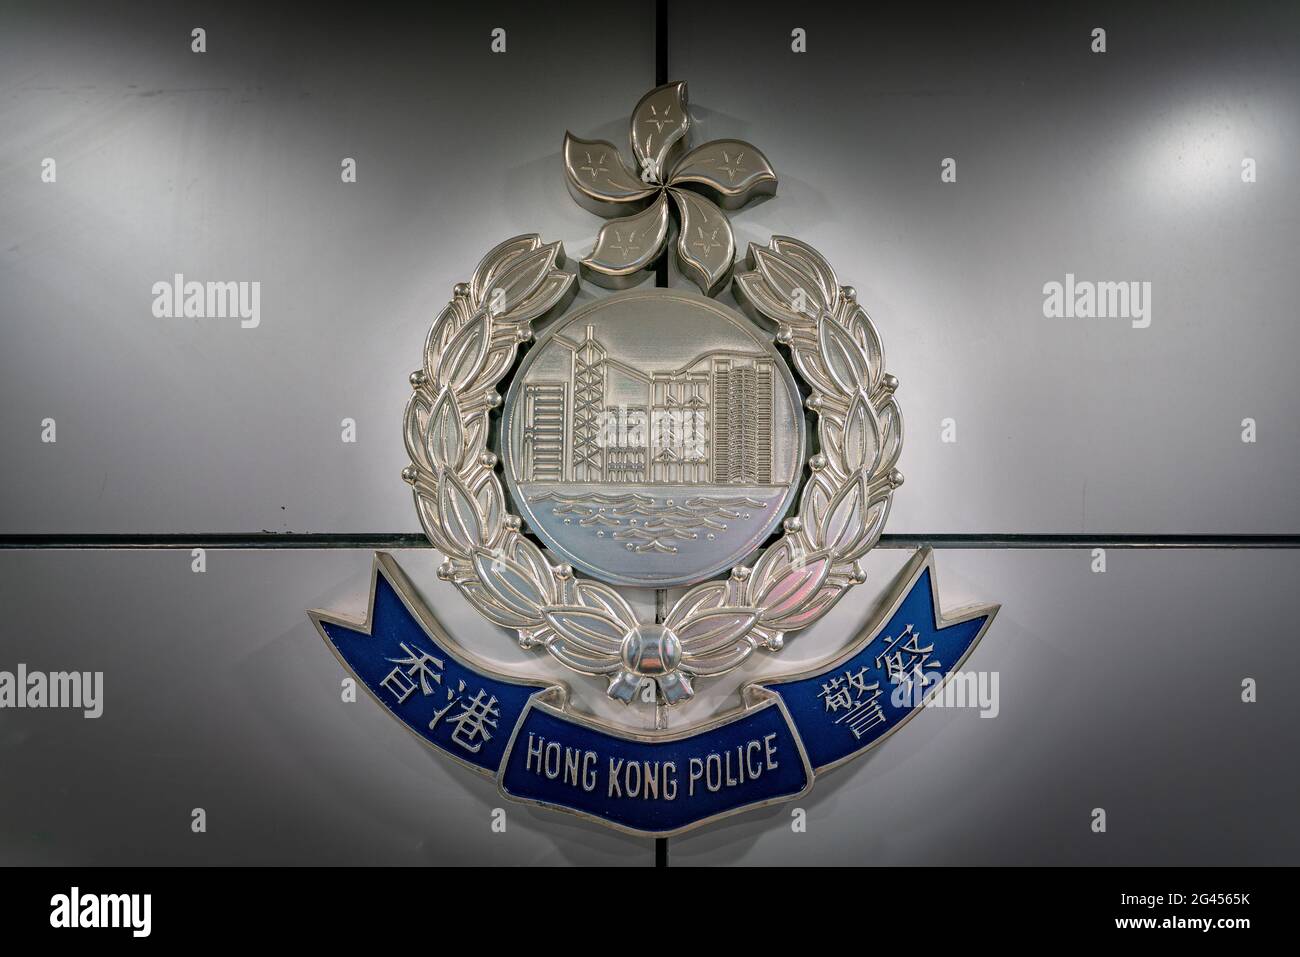 The Hong Kong police logo on the wall of police station. Stock Photo